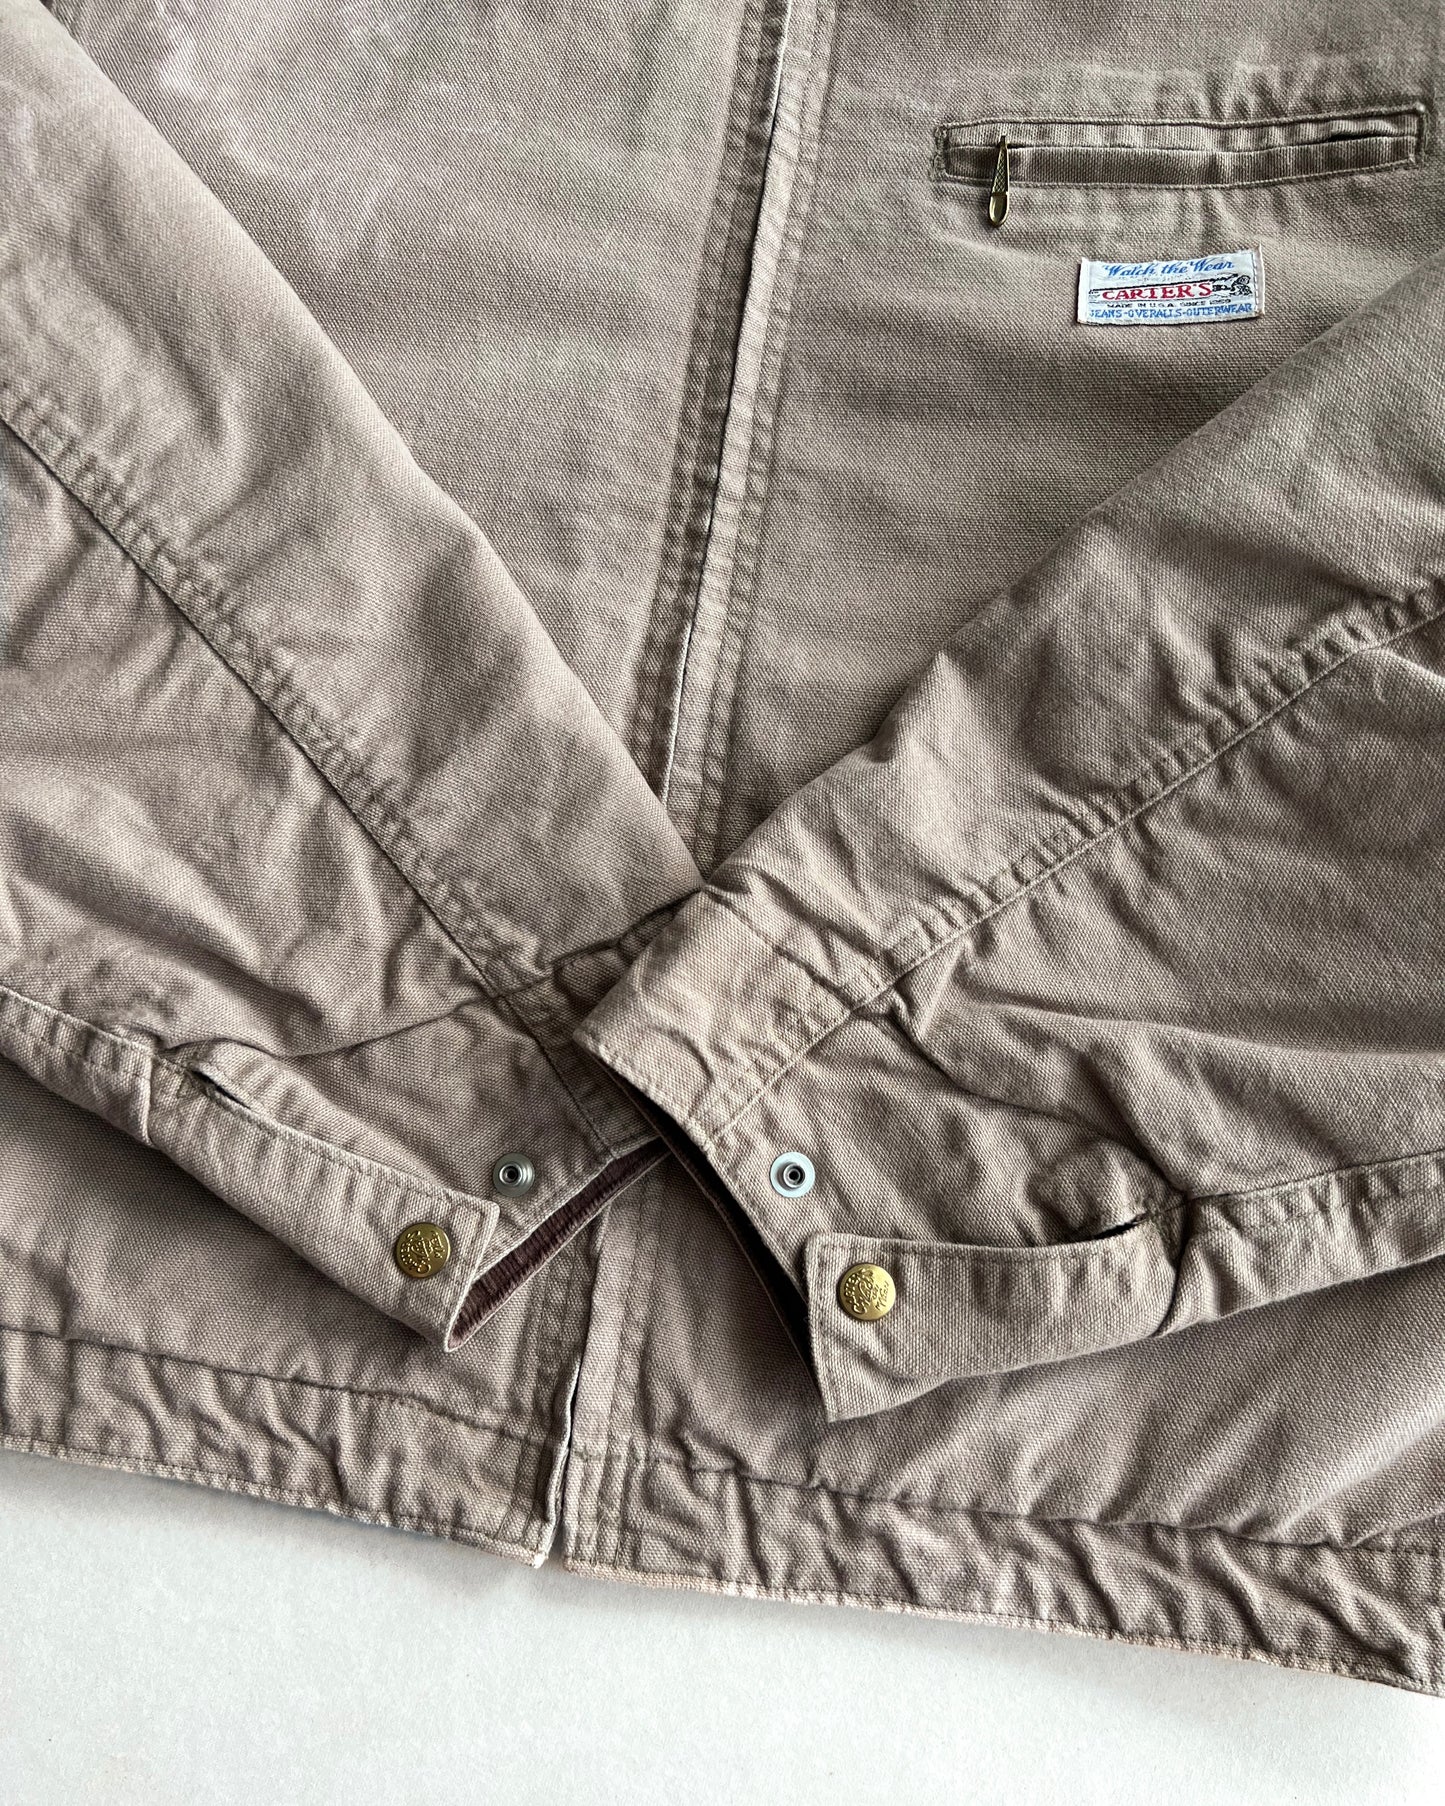 1980S SUN FADED CARTER'S CANVAS WORK JACKET (L)